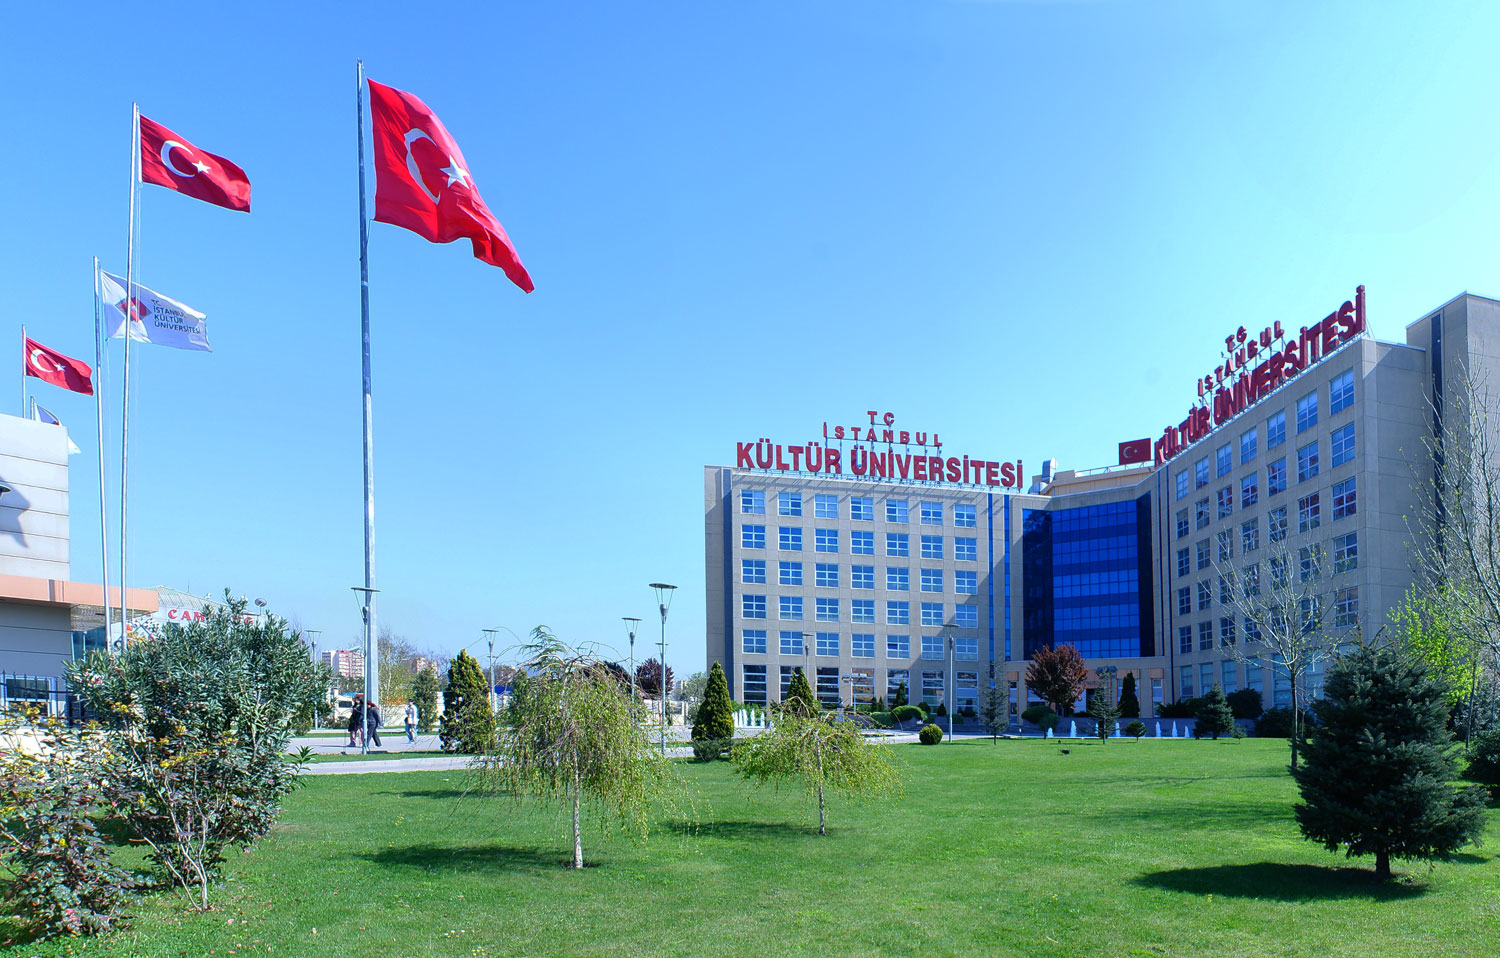 Global Political Trends Center - An Important Turkish Research Center